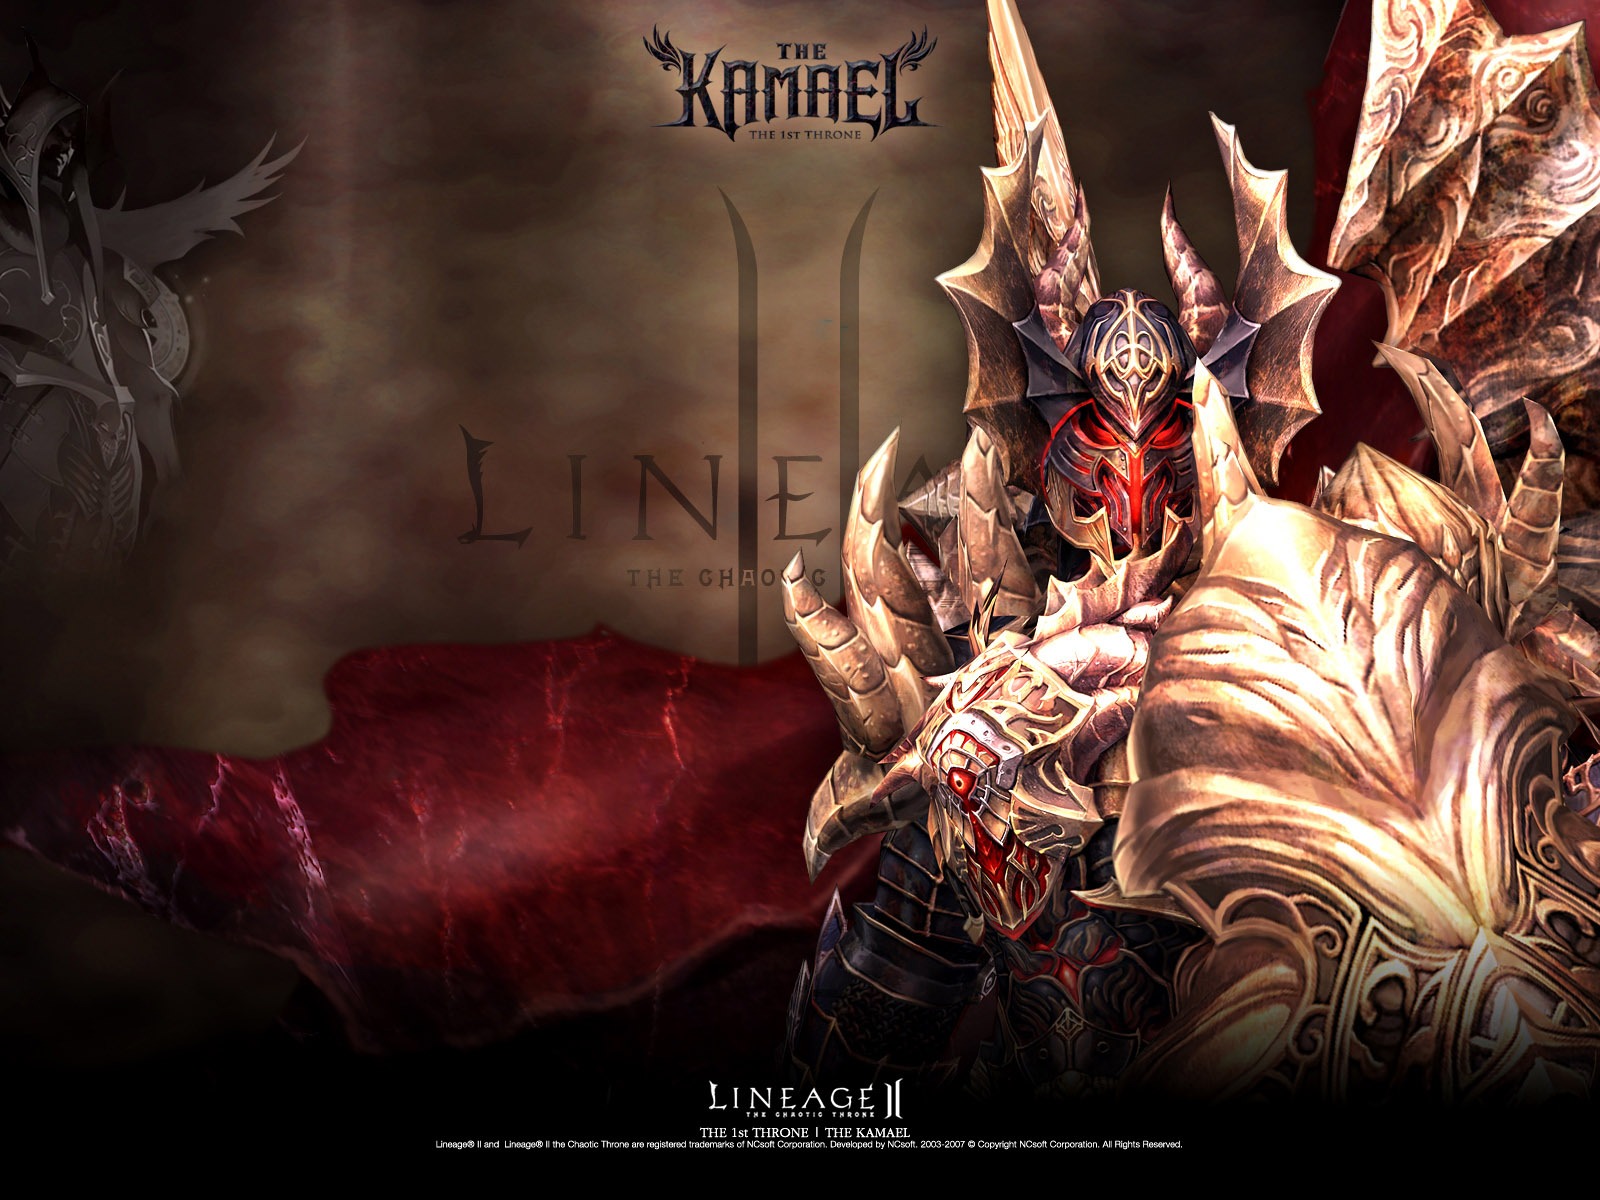 LINEAGE Ⅱ Modellierung HD-Gaming-Wallpaper #11 - 1600x1200